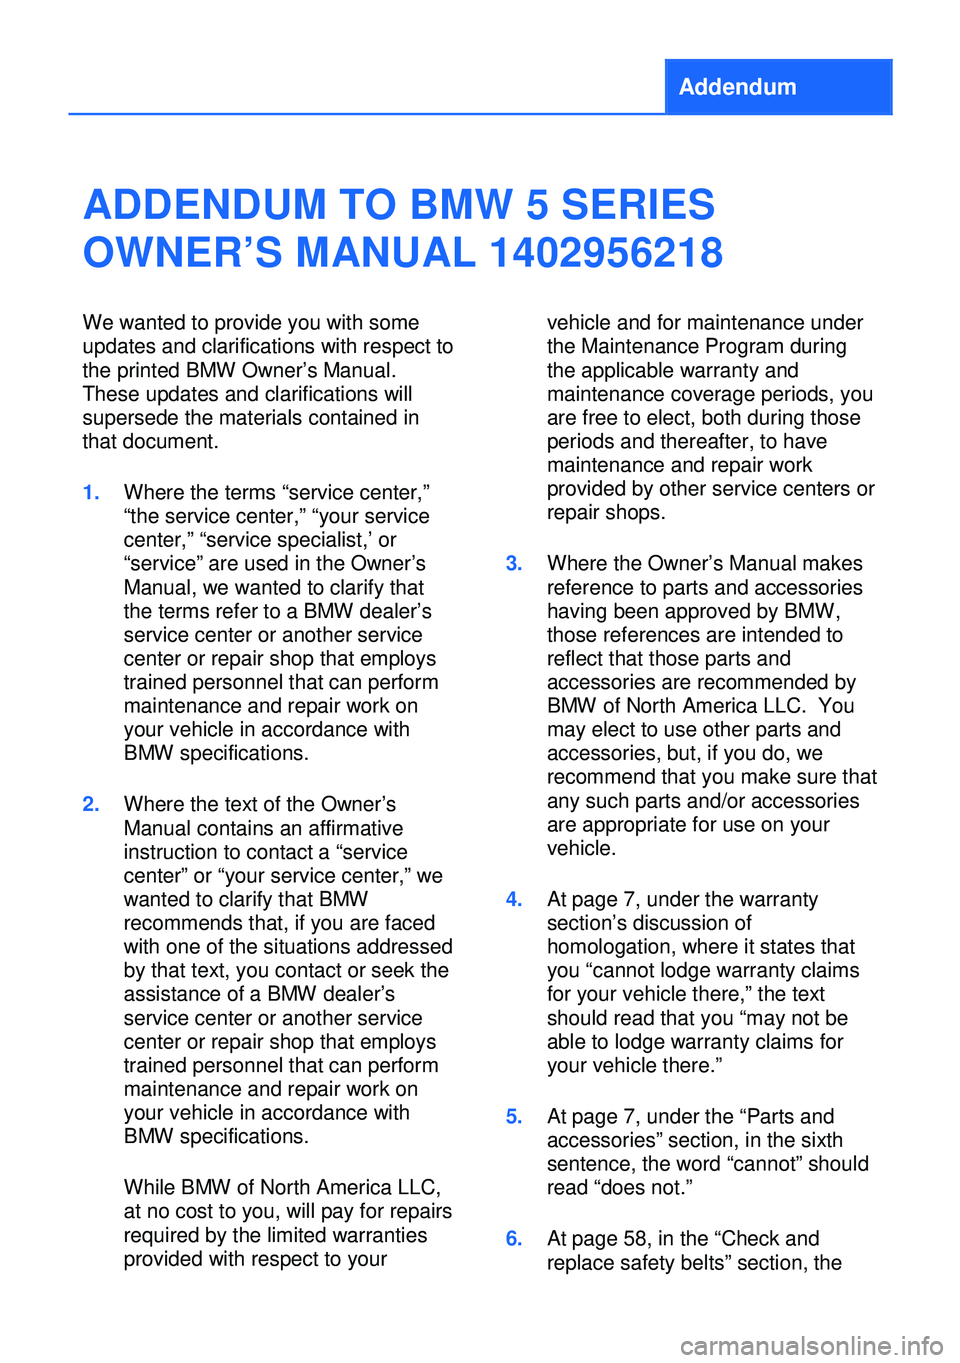 BMW 535I XDRIVE SEDAN 2014  Owners Manual Addendum
ADDENDUM TO BMW 5 SERIES
OWNER’S MANUAL 1402956218
We wanted to provide you with some
updates and clarifications with respect to
the printed BMW Owner’s Manual.
These updates and clarific